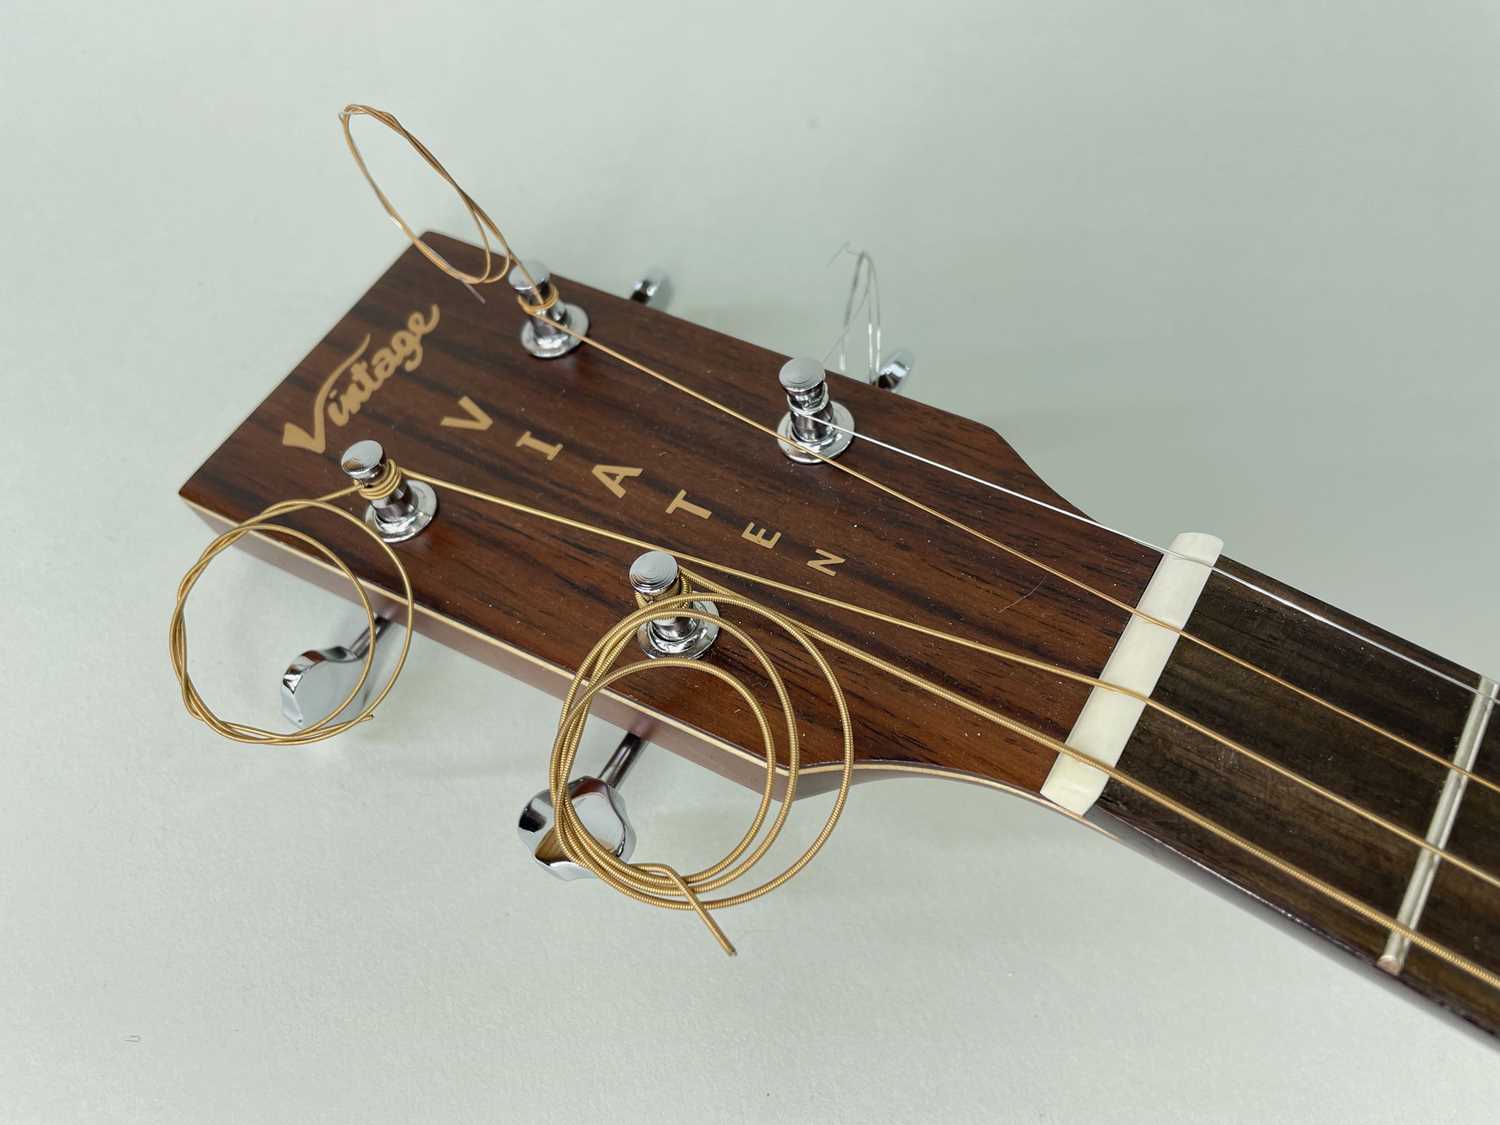 VINTAGE VIATEN ELECTRIC MANDOLA, with barber's pole decorative edging around head and sound hole, - Image 3 of 4